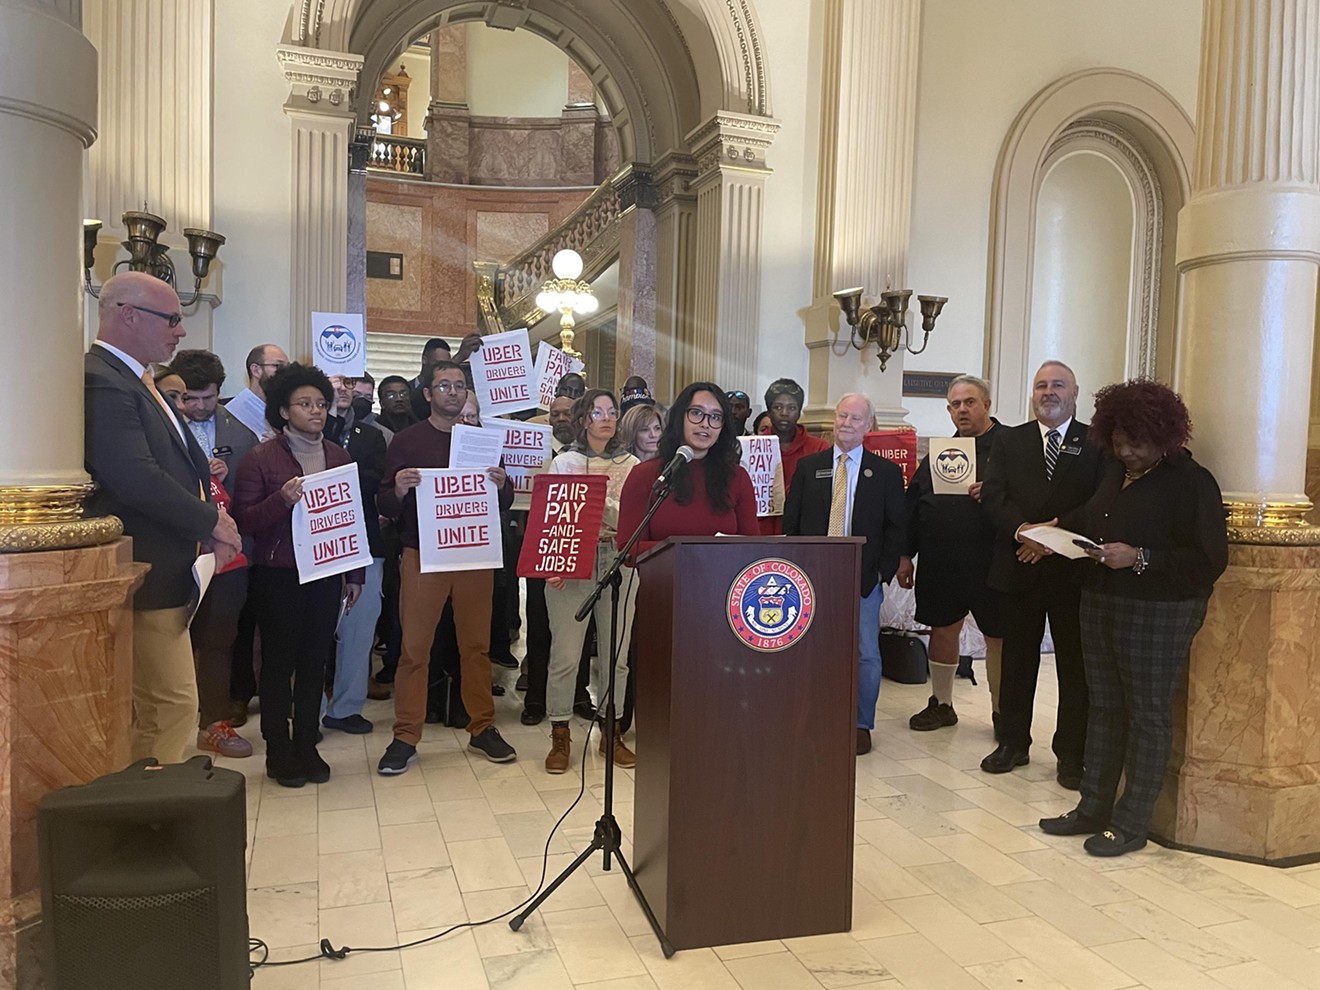 Researcher and part-time rideshare driver Samantha Dalal spoke at a February 20 rally.